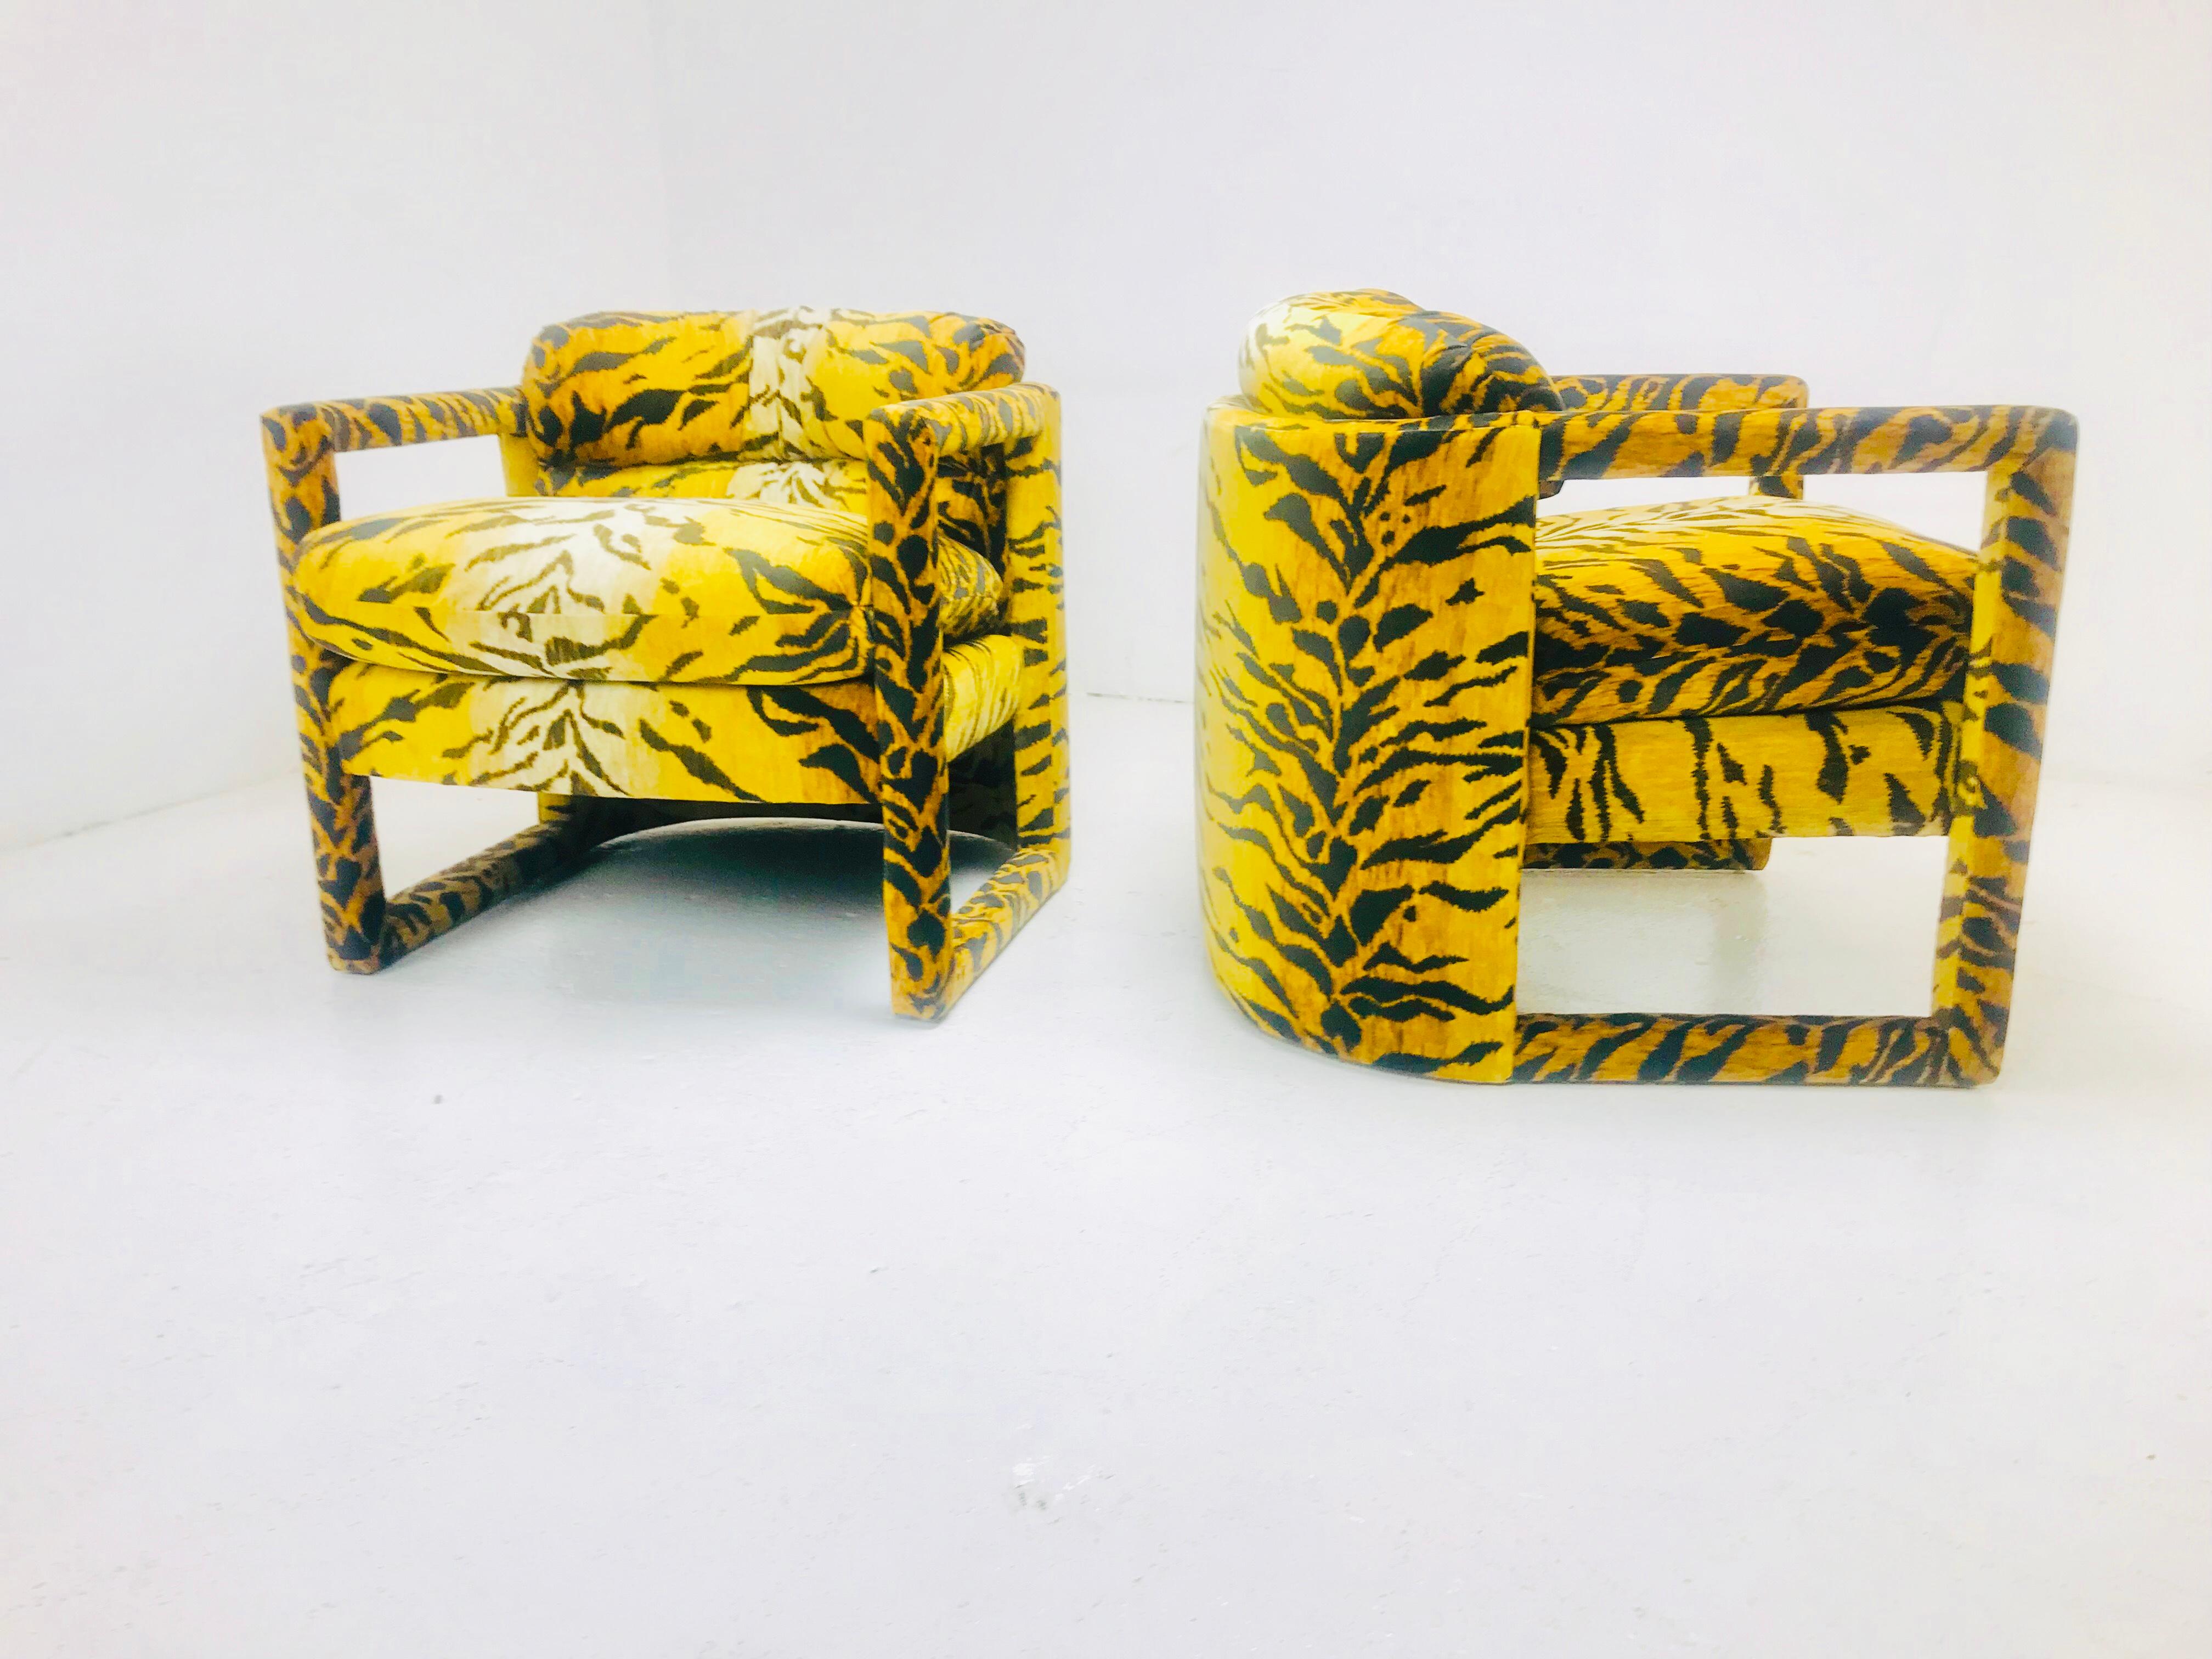 Pair of Custom Tiger Print Chairs in the Style of Milo Baughman For Sale 2